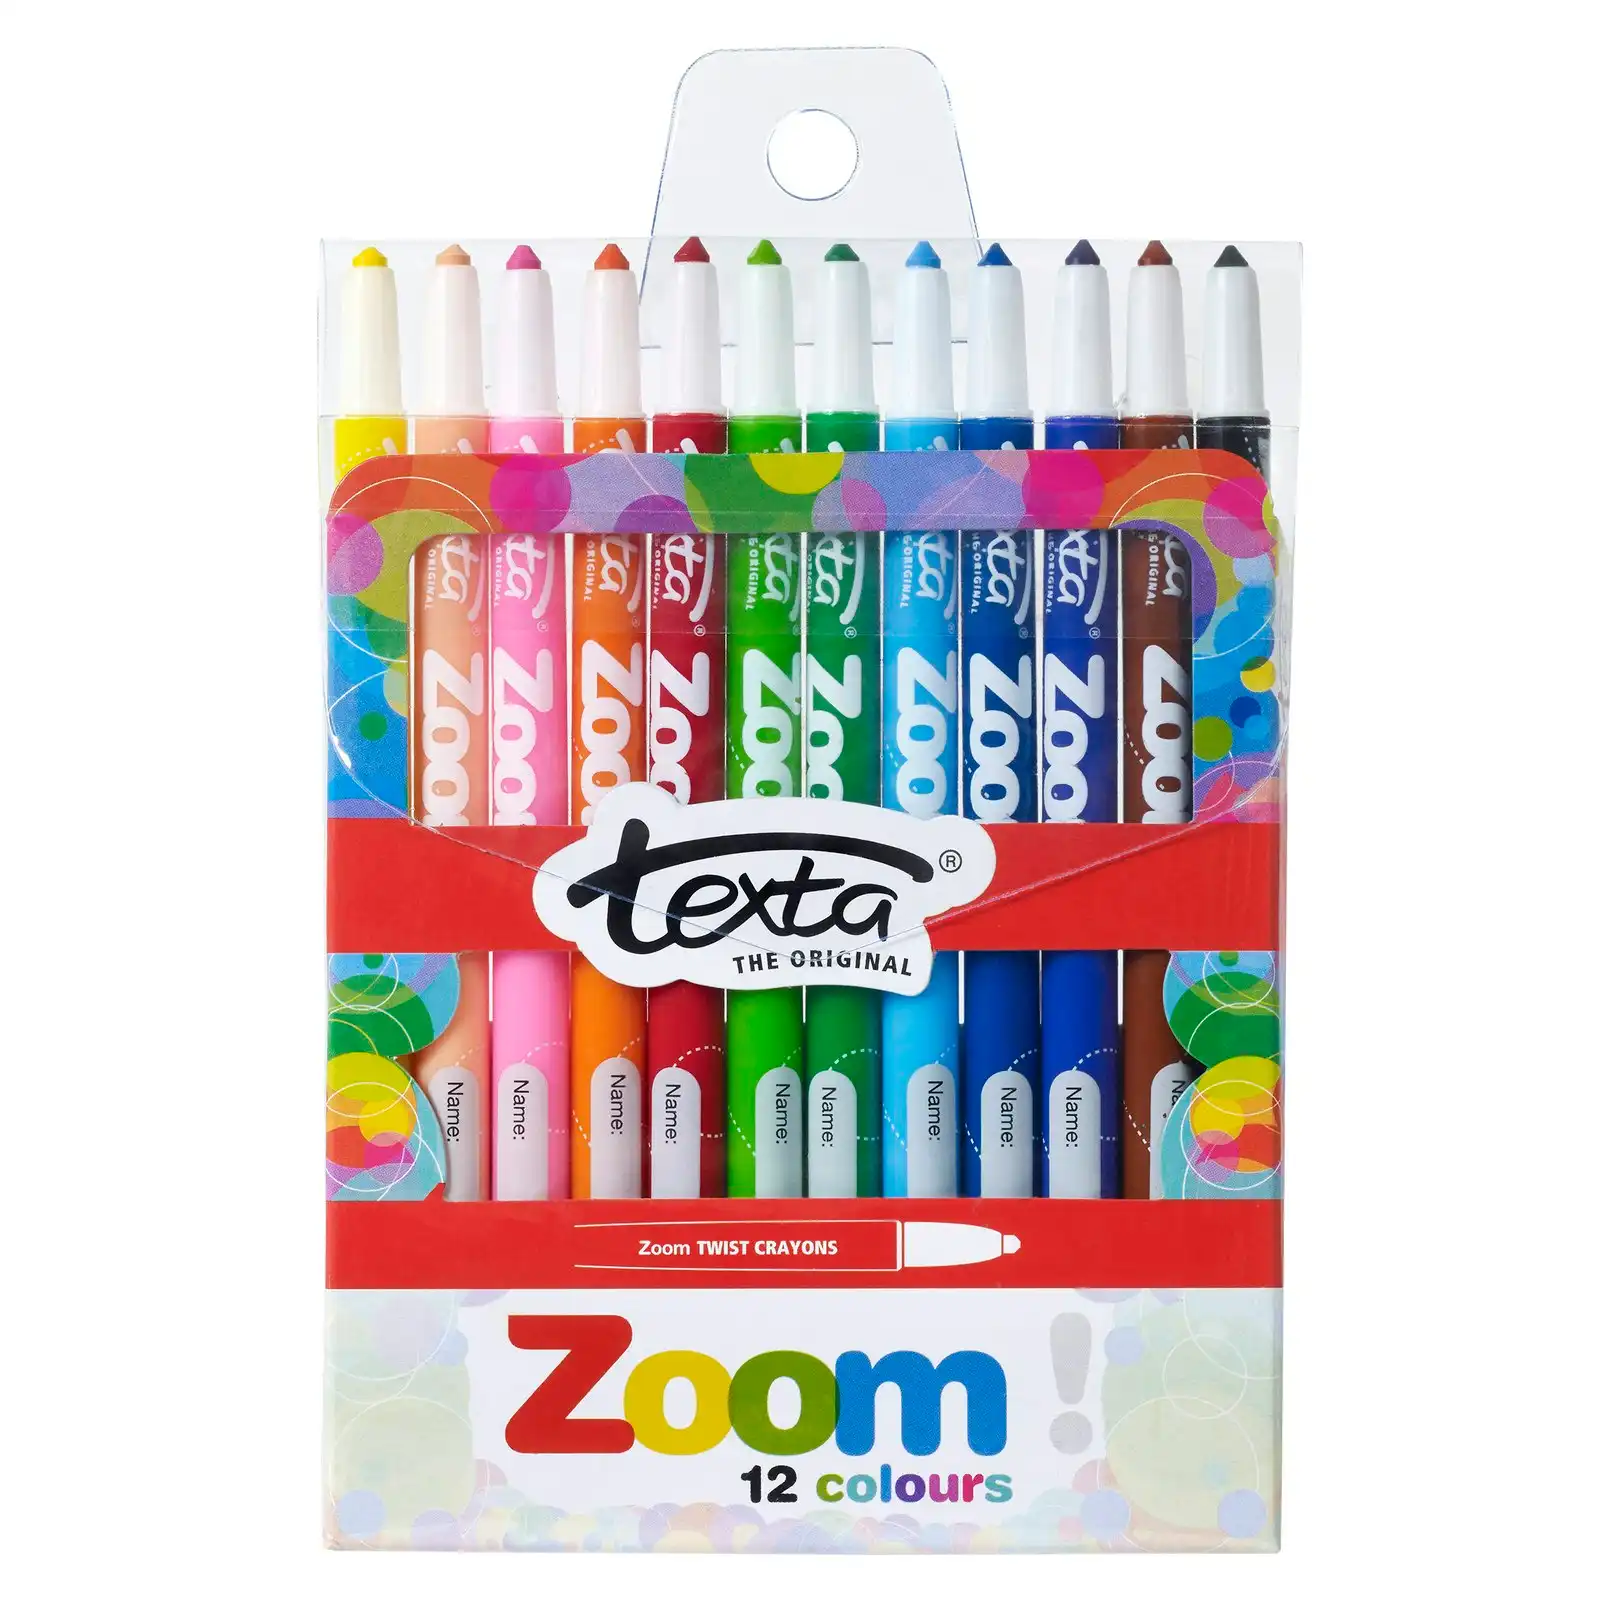 12pc Texta The Original Zoom Non Toxic Twist Crayons Colouring/Drawing Kids